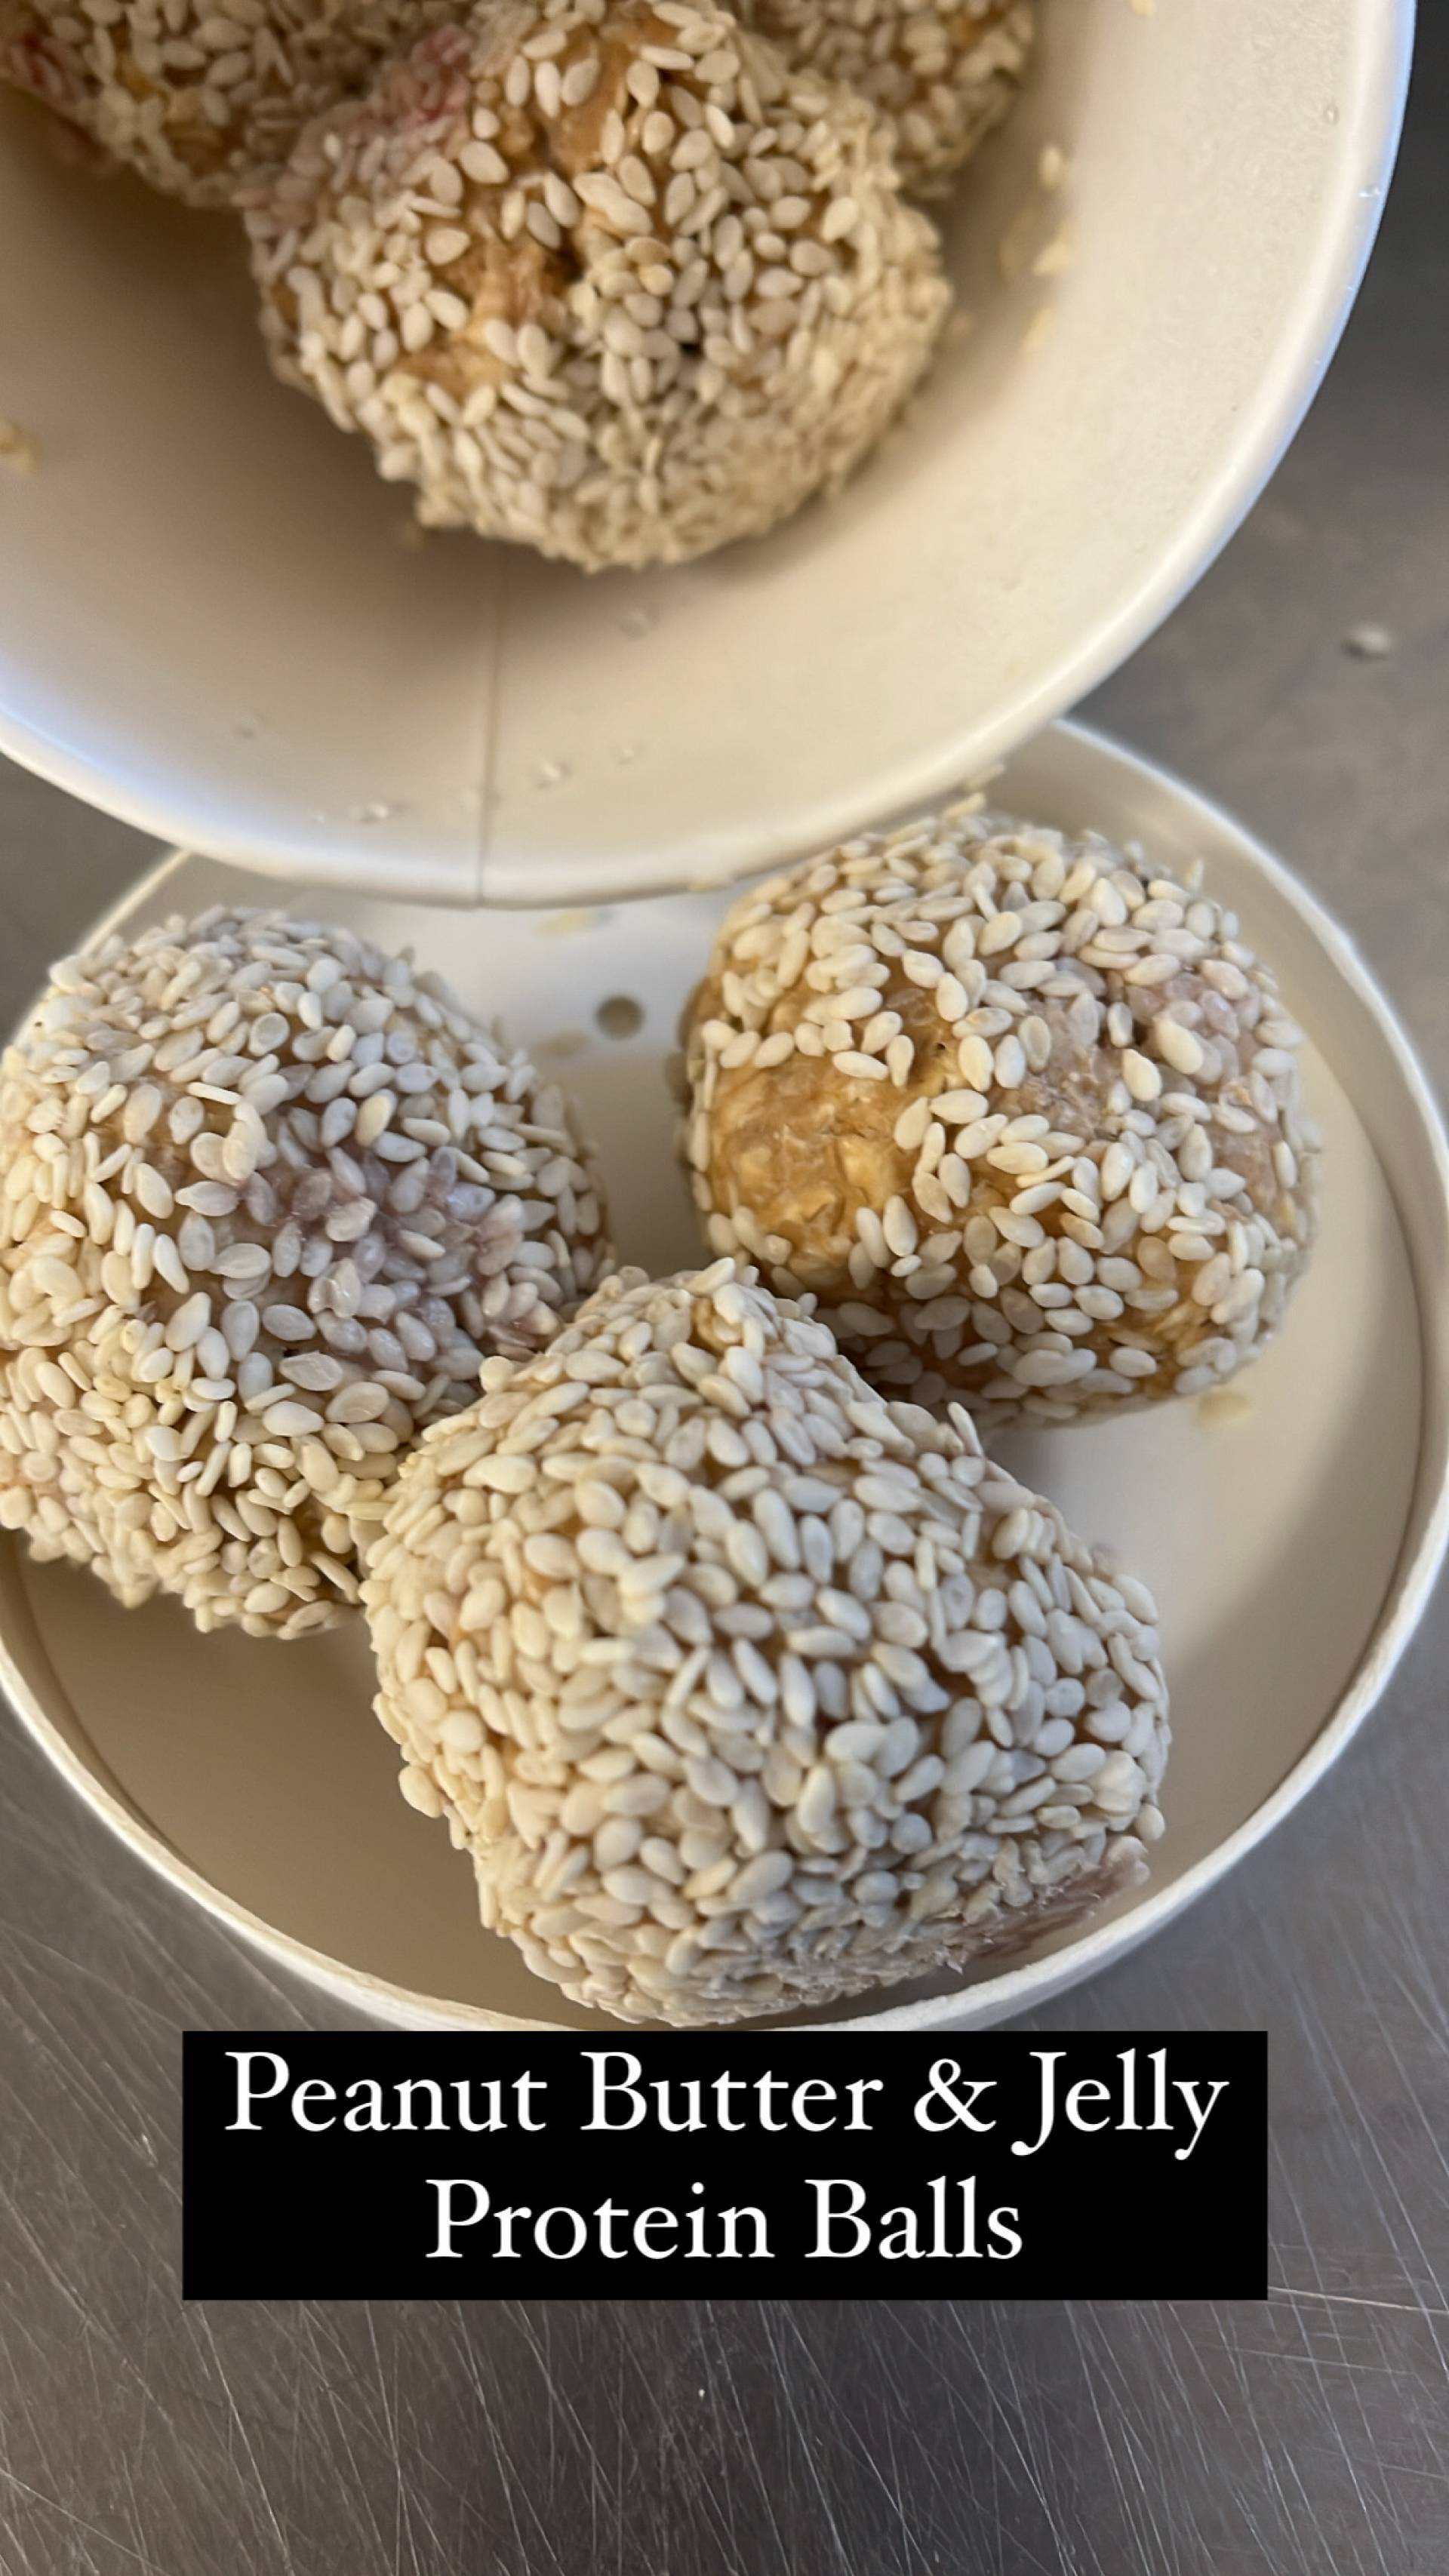 Snack) Peanut Butter & Jelly Power Protein Balls (6)